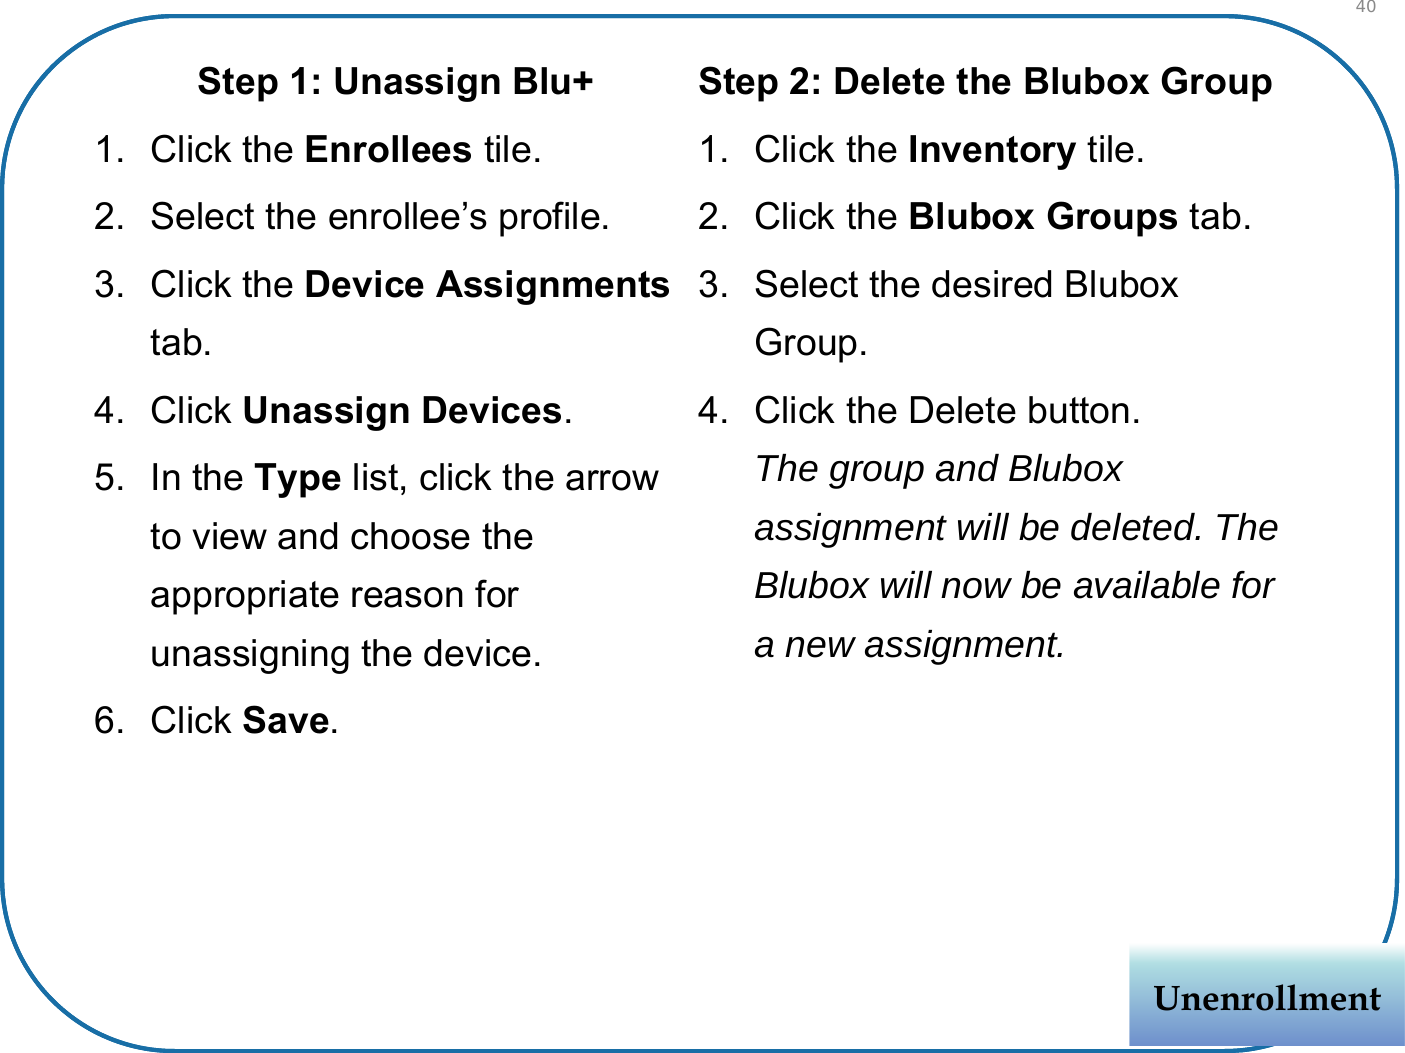 Step 1: Unassign Blu+1. Click the Enrollees tile.2. Select the enrollee’s profile.3. Click the Device Assignmentstab.4. Click Unassign Devices.5. In the Type list, click the arrow to view and choose the appropriate reason for unassigning the device.6. Click Save.Step 2: Delete the Blubox Group1. Click the Inventory tile.2. Click the Blubox Groups tab.3. Select the desired Blubox Group.4. Click the Delete button.The group and Blubox assignment will be deleted. The Blubox will now be available for a new assignment.UnenrollmentUnenrollment40